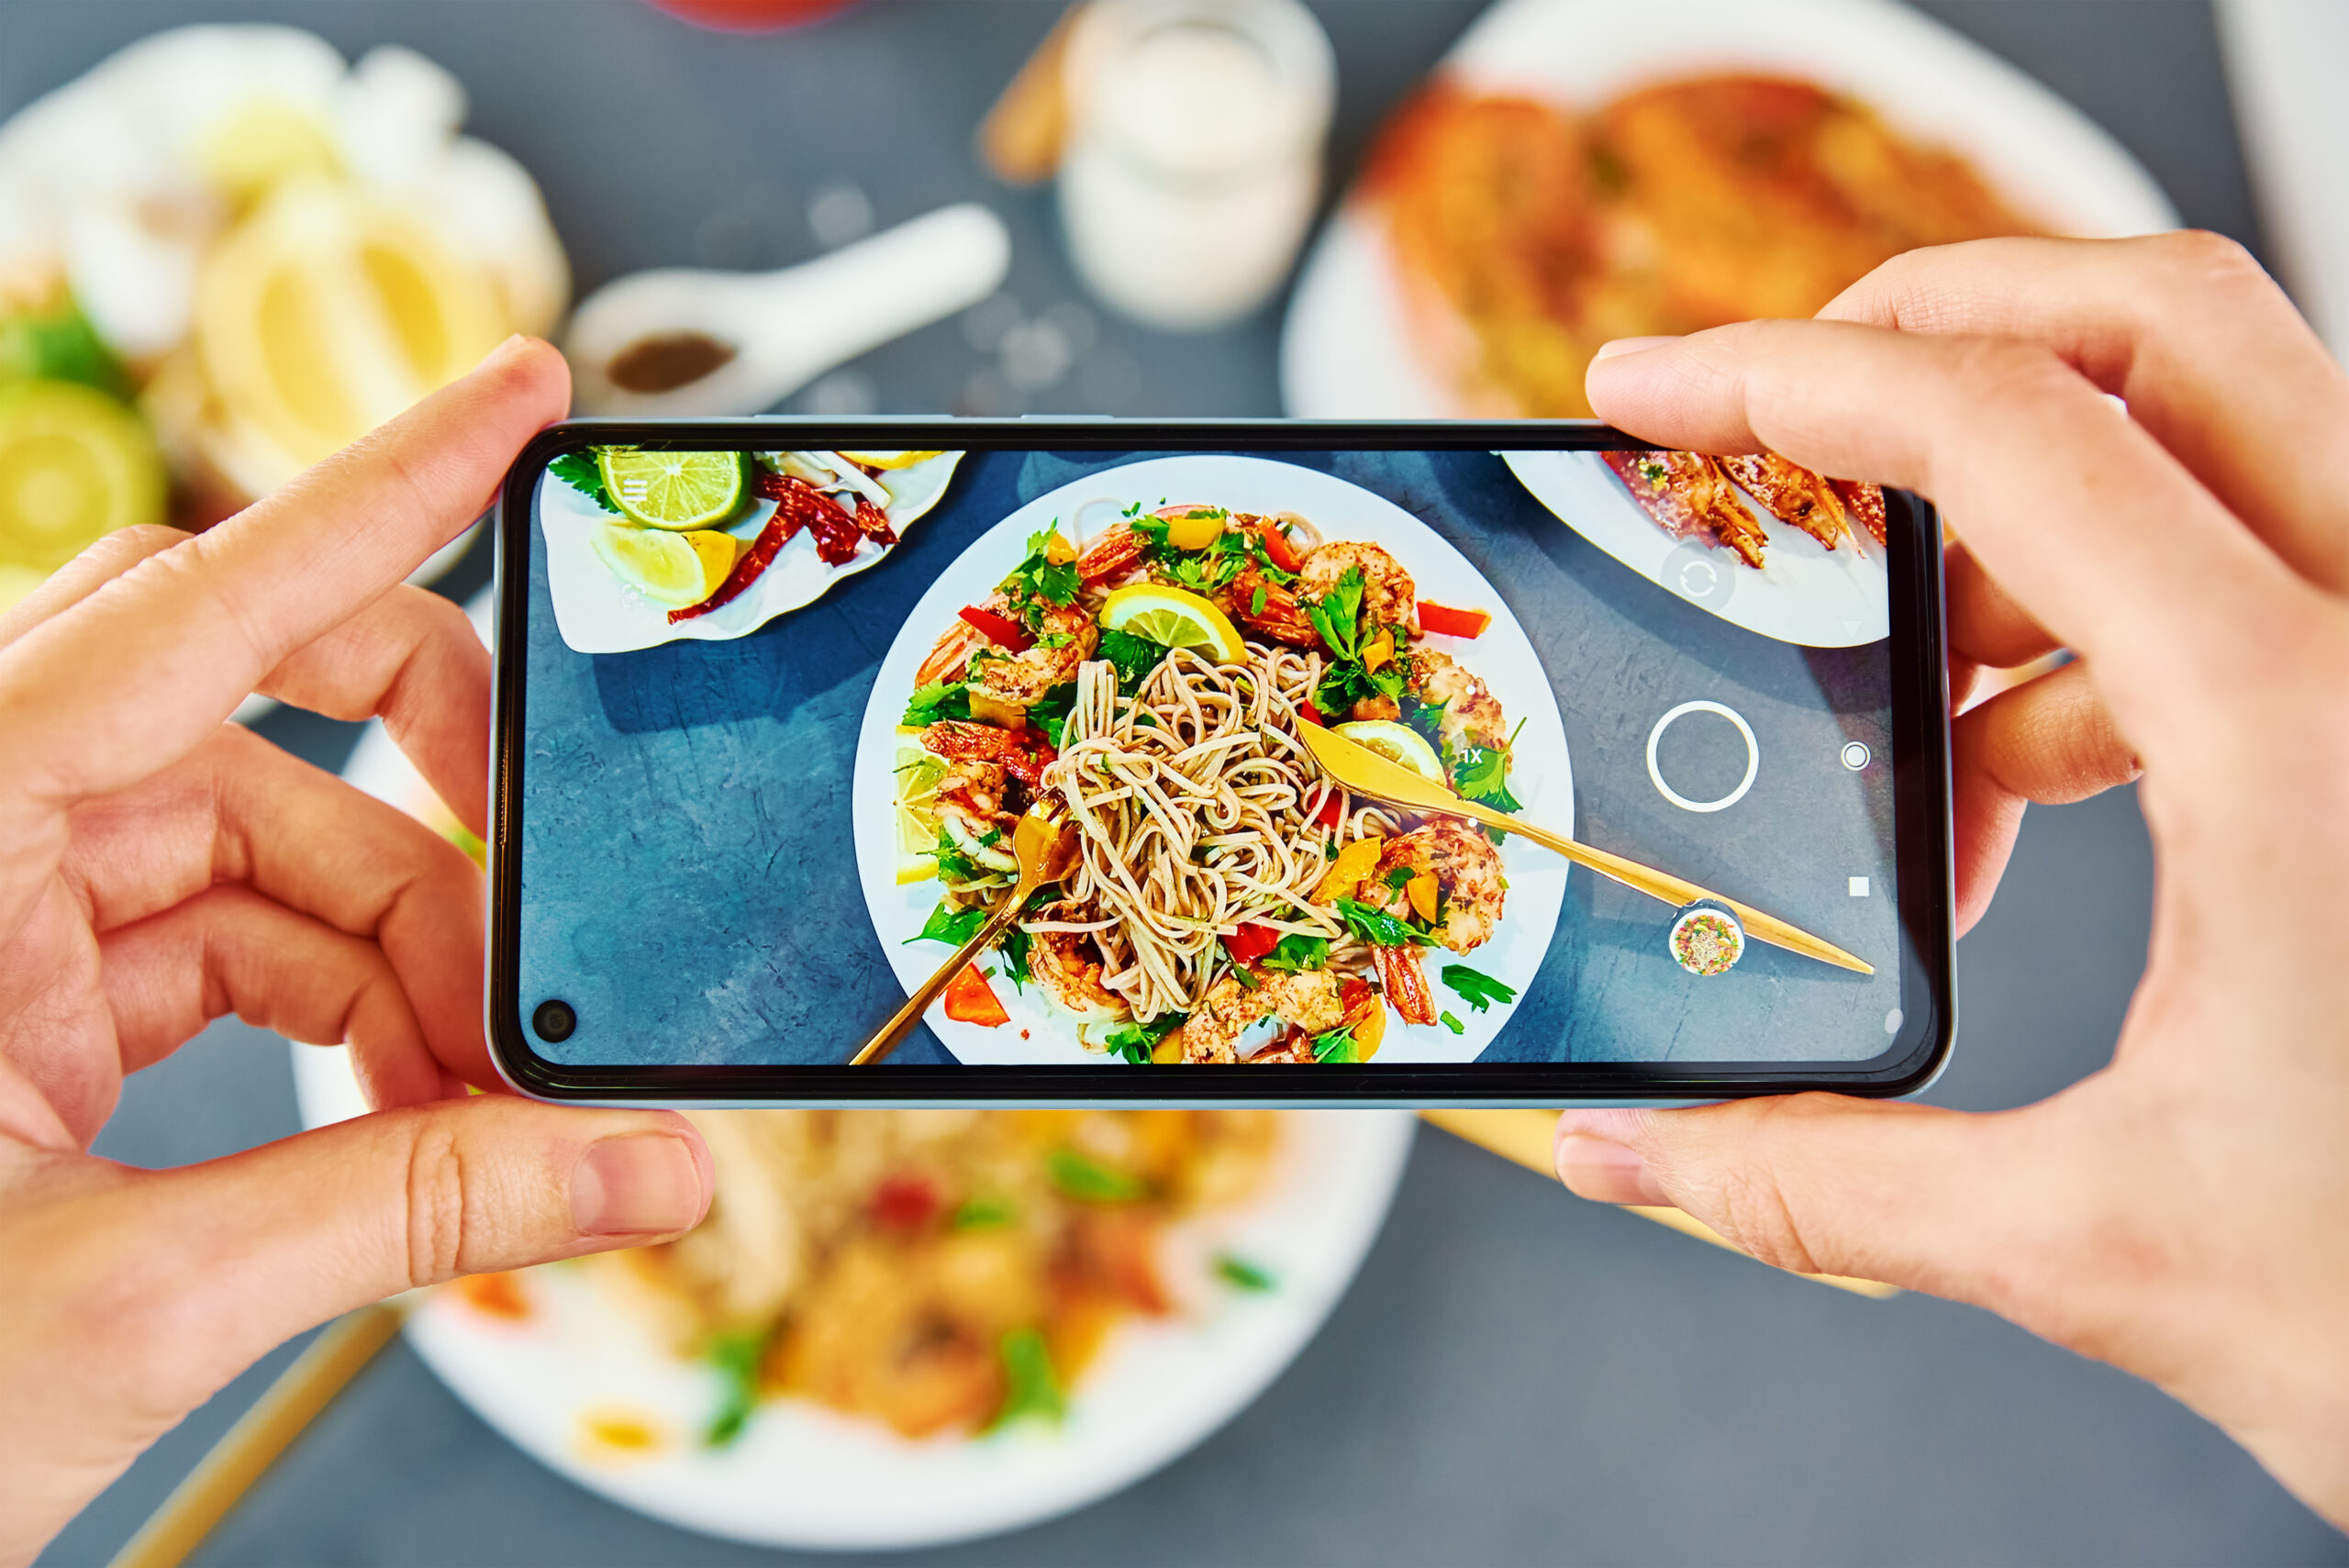 Taking a photo of stir fry noodles with a smartphone